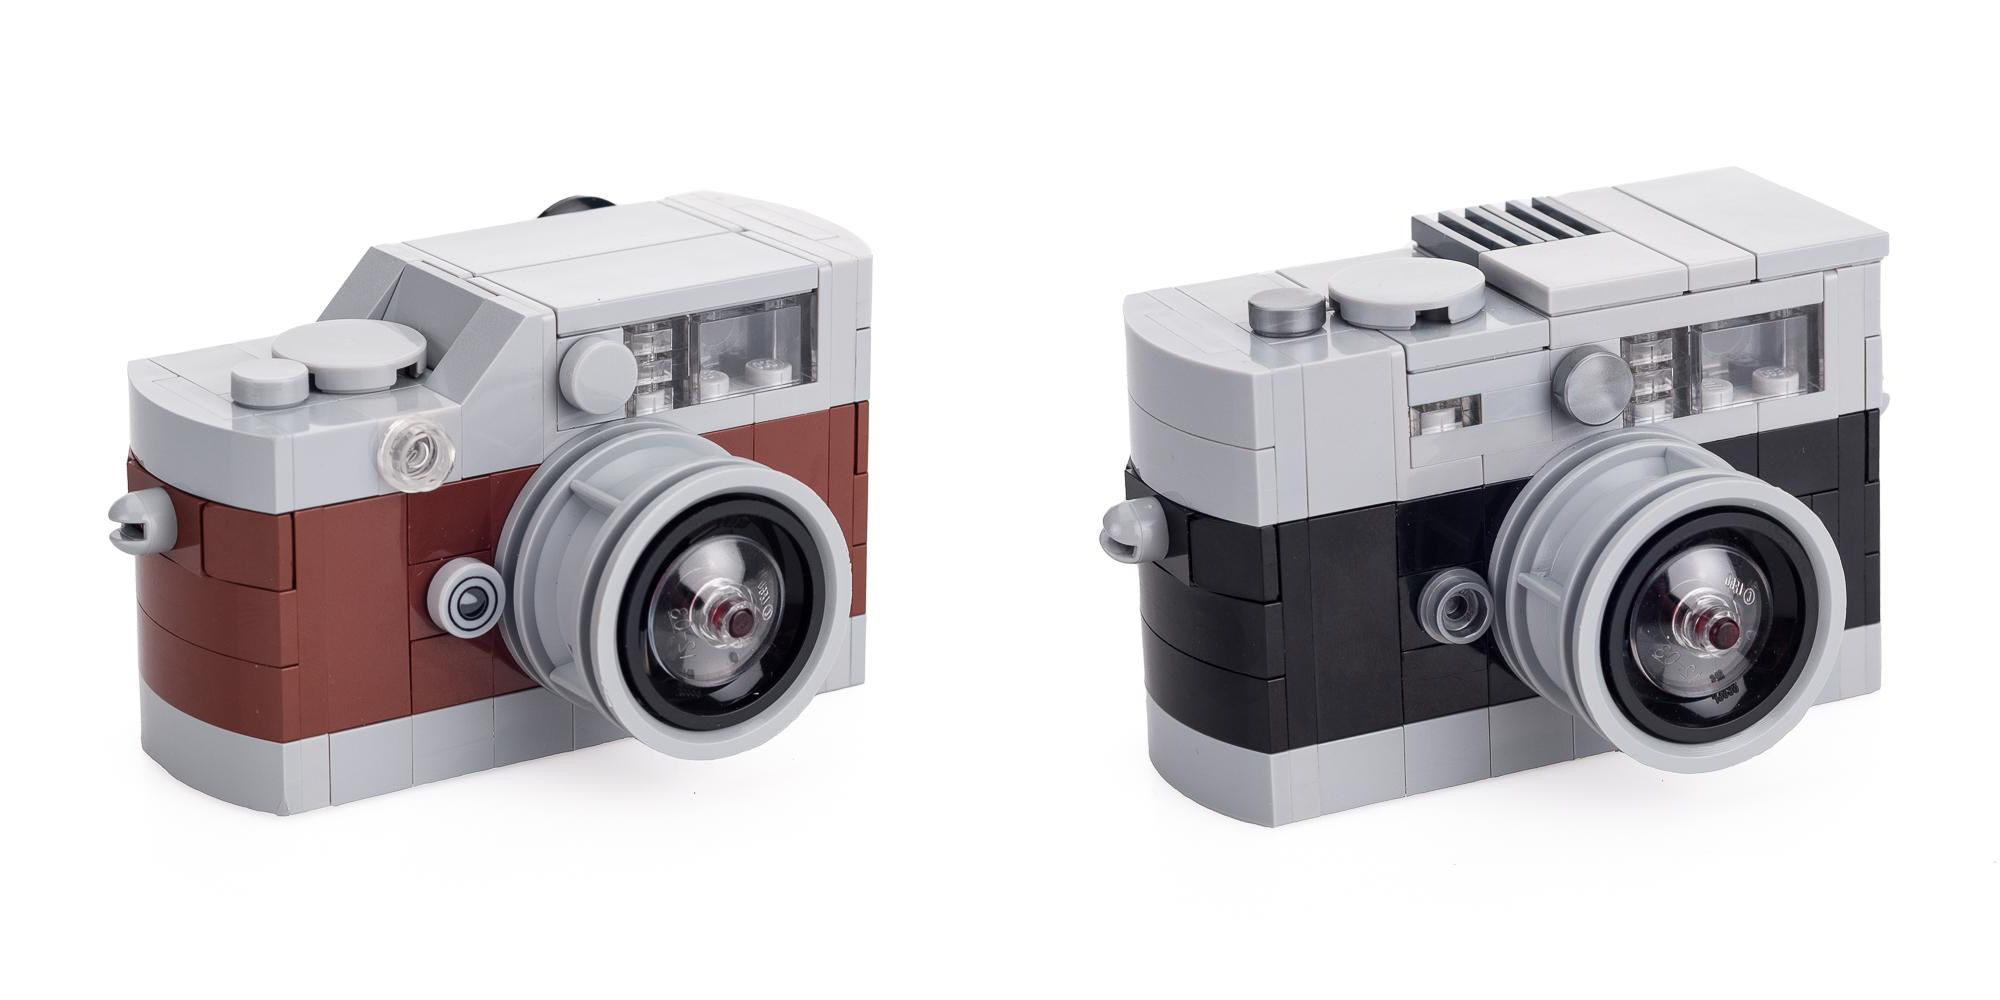 This LEGO Leica M Camera can be yours for $45 - 9to5Toys